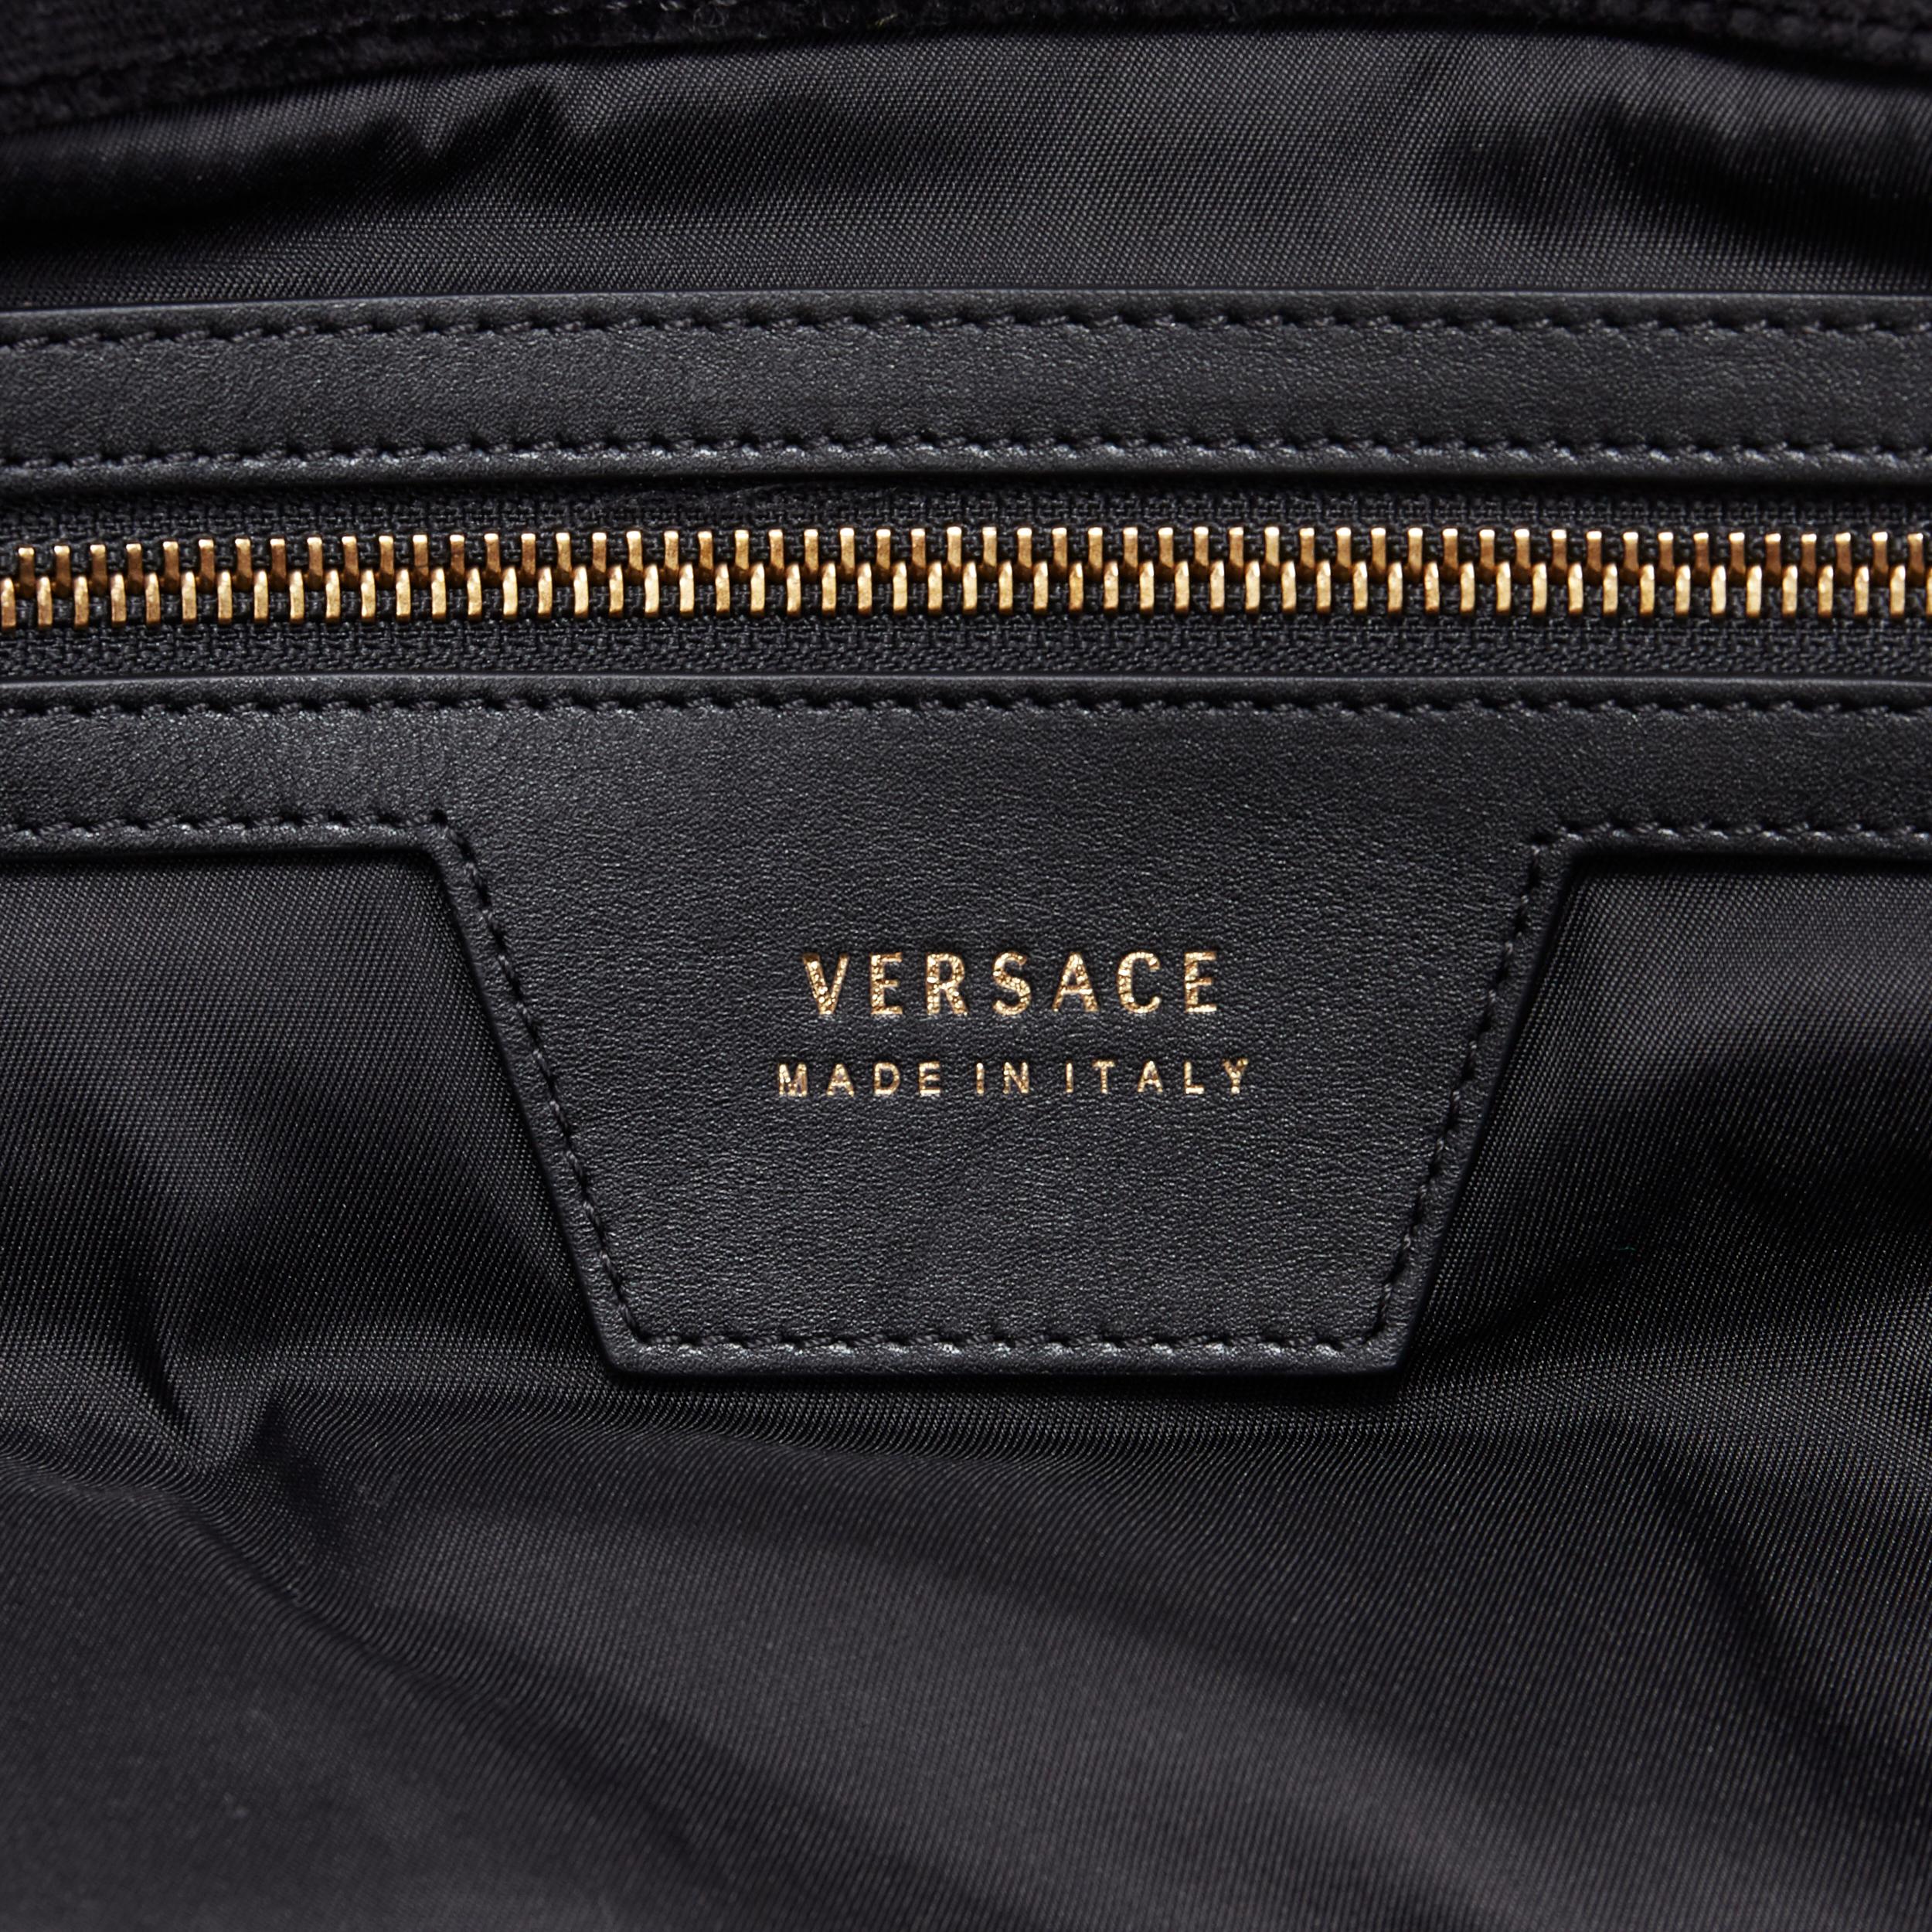 new VERSACE Runway Pillow Talk black velvet quilted foldover clutch tote bag 4